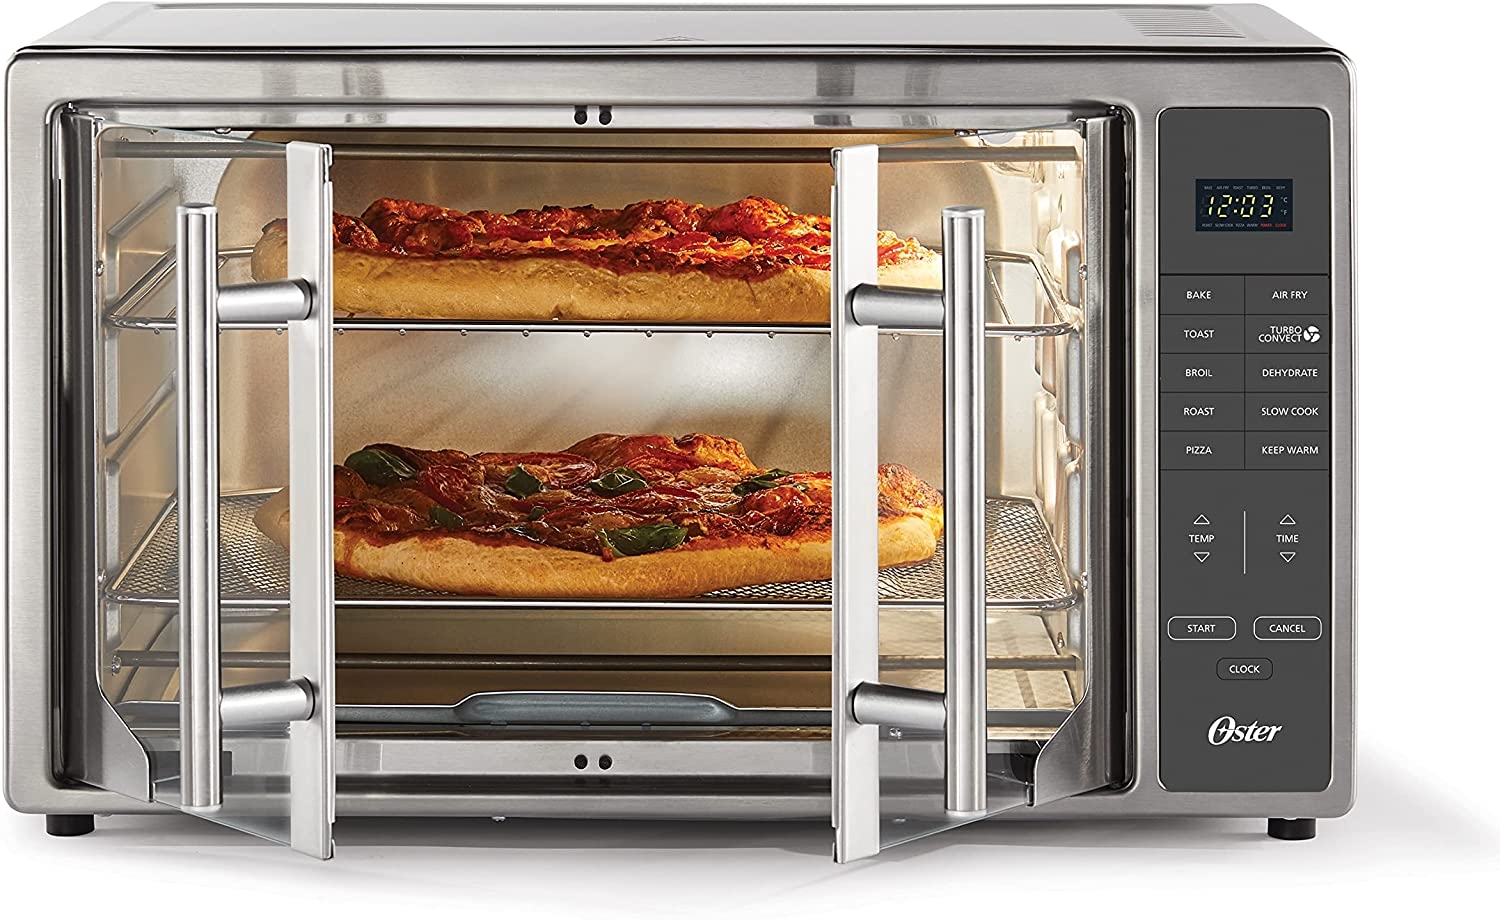 Oster Air Fryer Oven, 10-in-1 Countertop Toaster Oven, XL Fits 2 16″ Pizzas, Stainless Steel French Doors Import To Shop